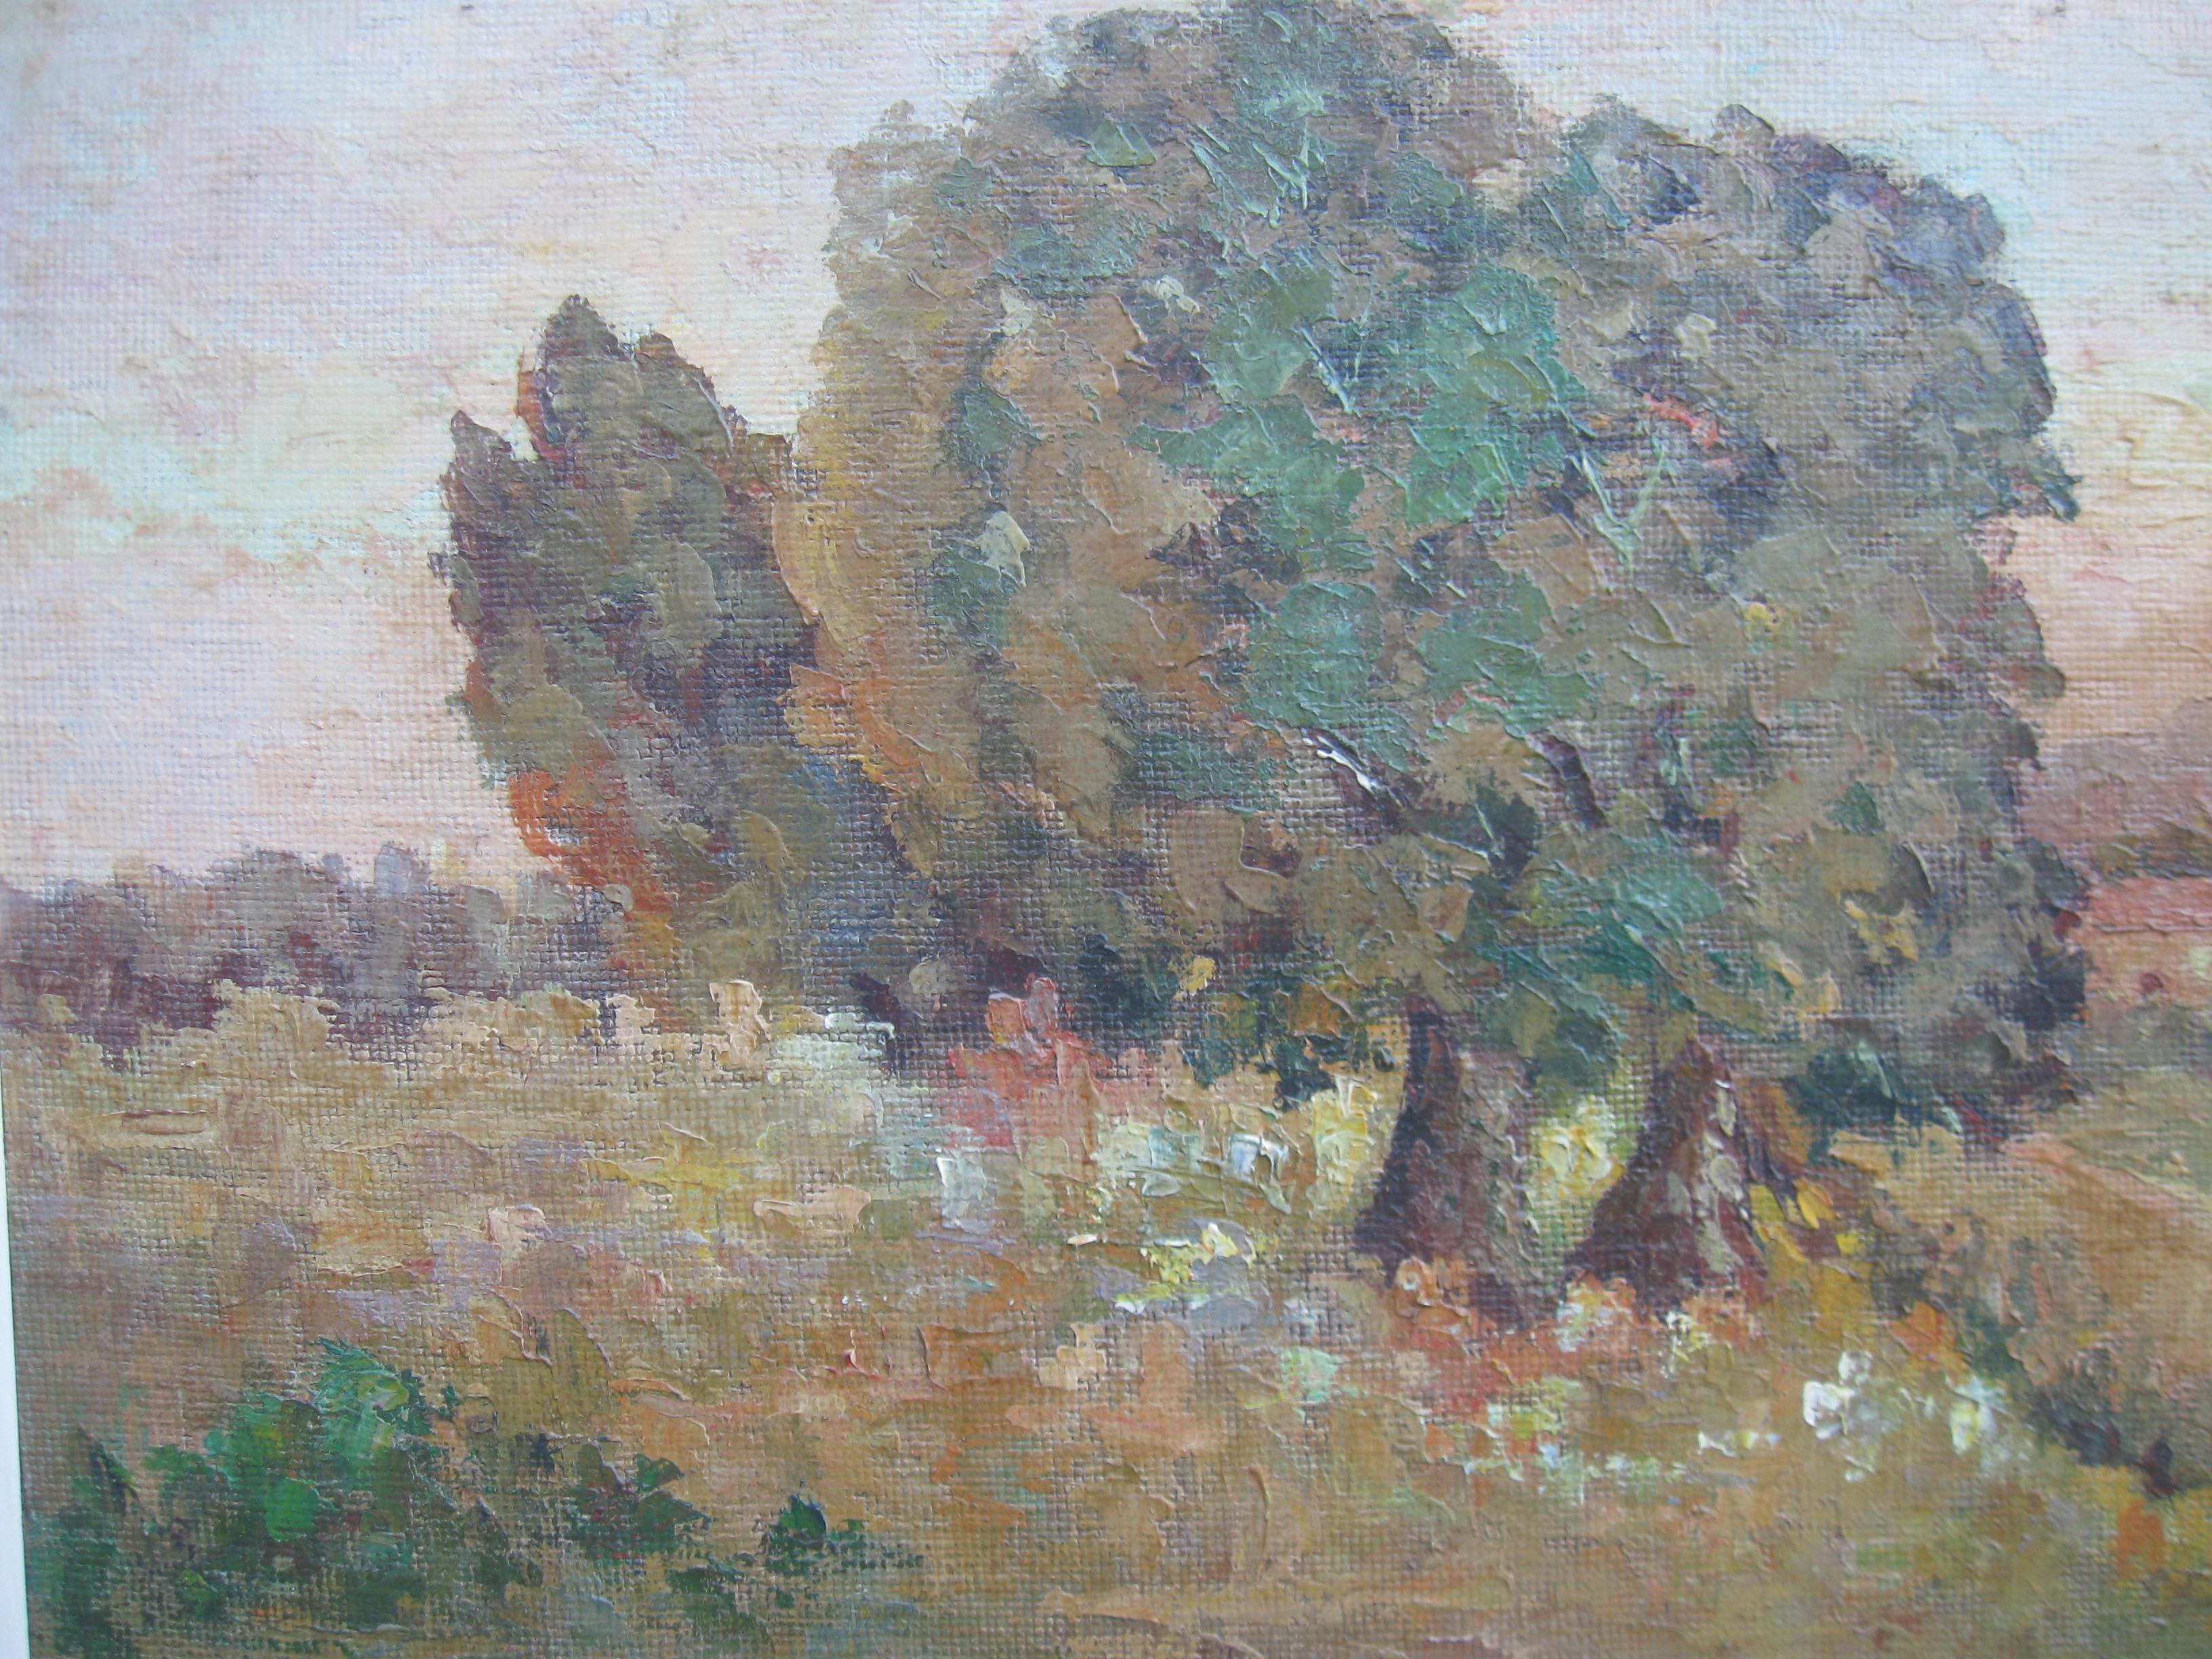 A fine large French Impressionist oil circa 1950's
Oil on board 52cm x 89cm
The original French stucco and wood frame 60cmx98cm
Entitled Les Oliviers: The Olive Trees
An extensive landscape with the trees and a dwelling with figures. Mountains can